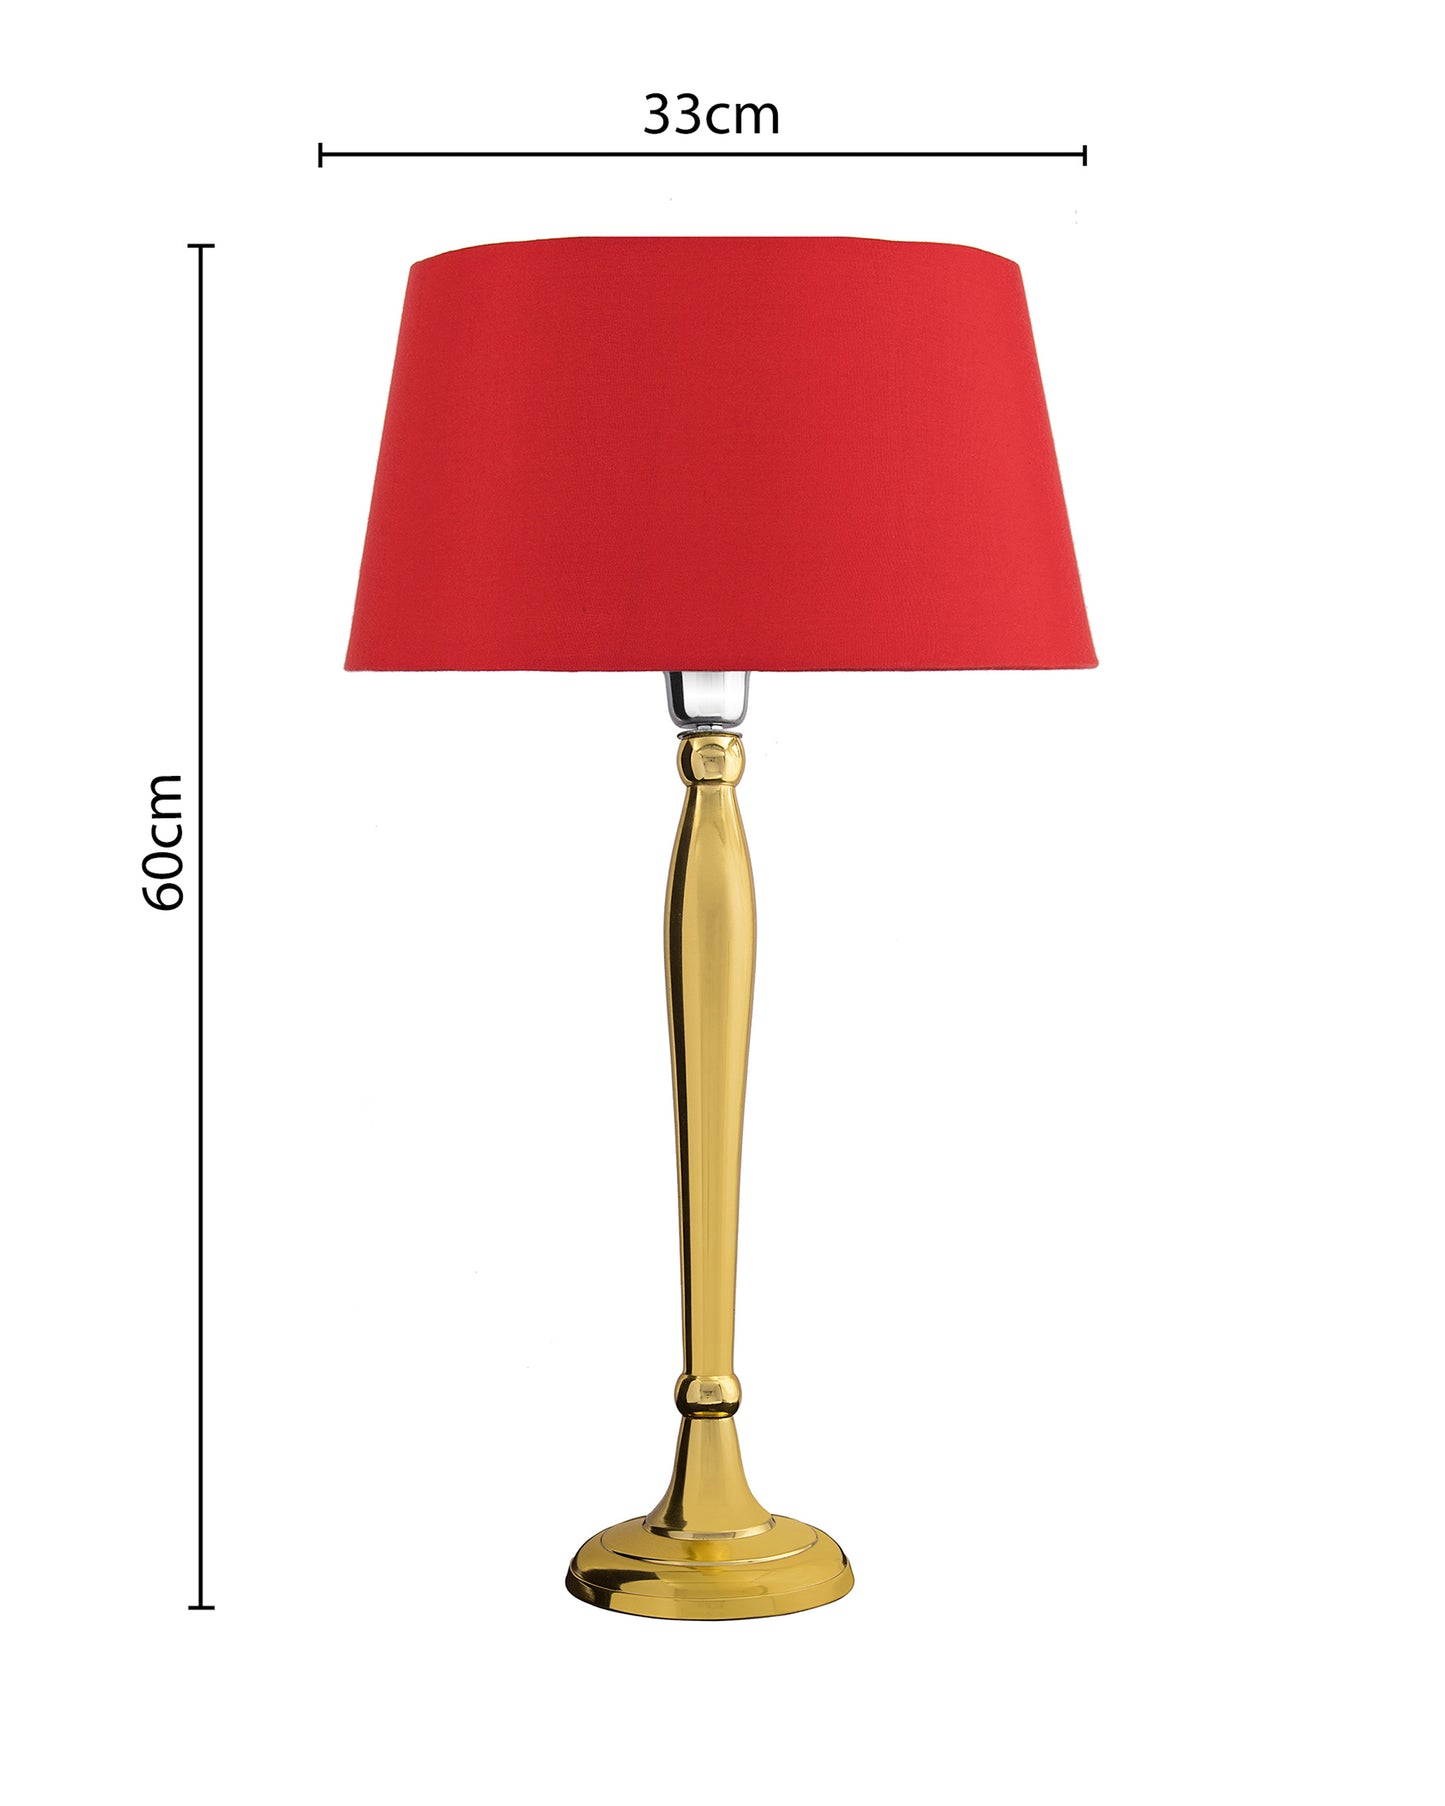 Royal Ovoid gold brushed lamp with shade